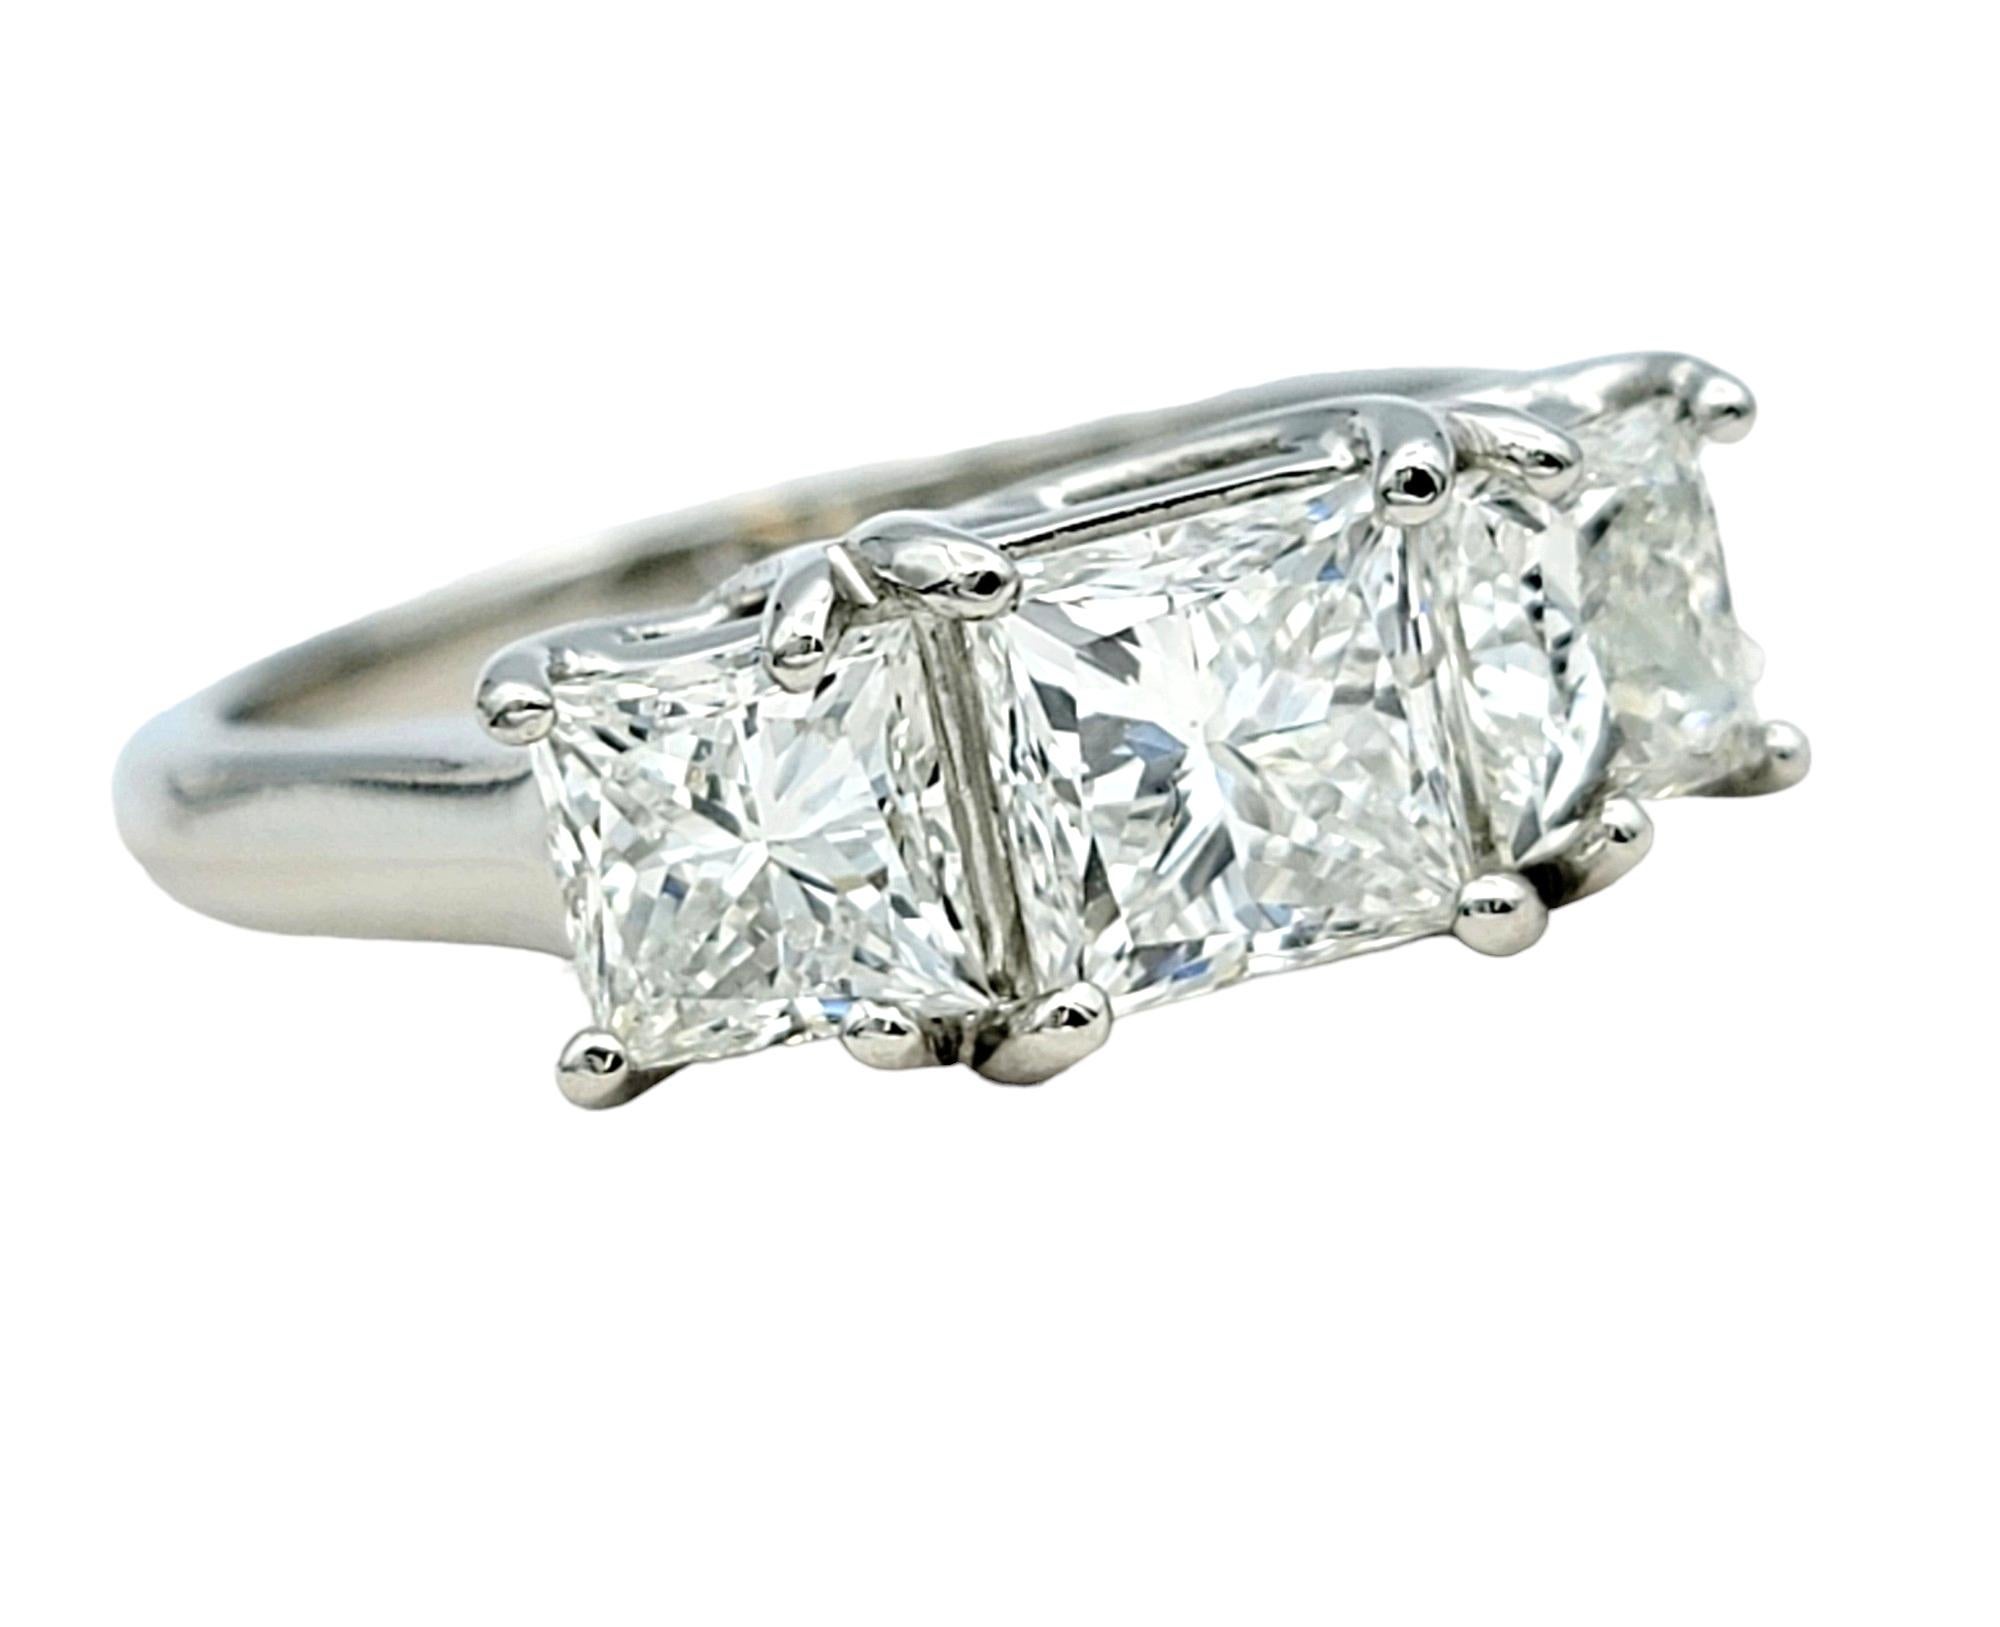 1.83 Total Carat Princess Cut Three Stone Diamond Ring Set in Platinum, Size 5.5 In Good Condition For Sale In Scottsdale, AZ